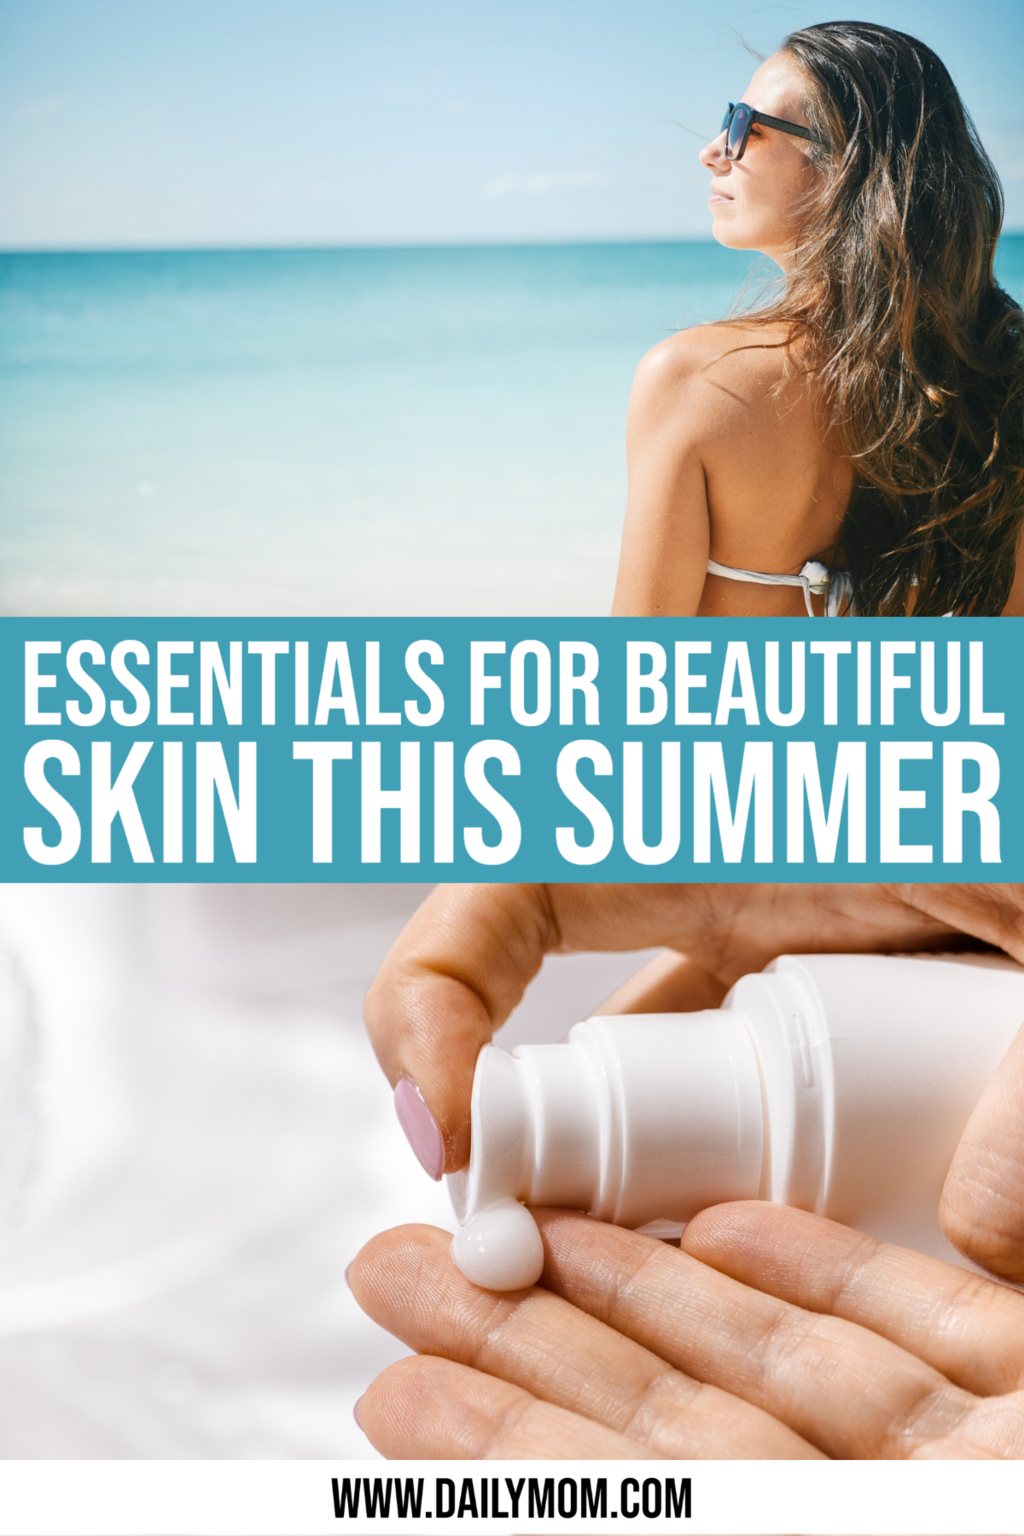 16 Essentials For Beautiful Skin This Summer